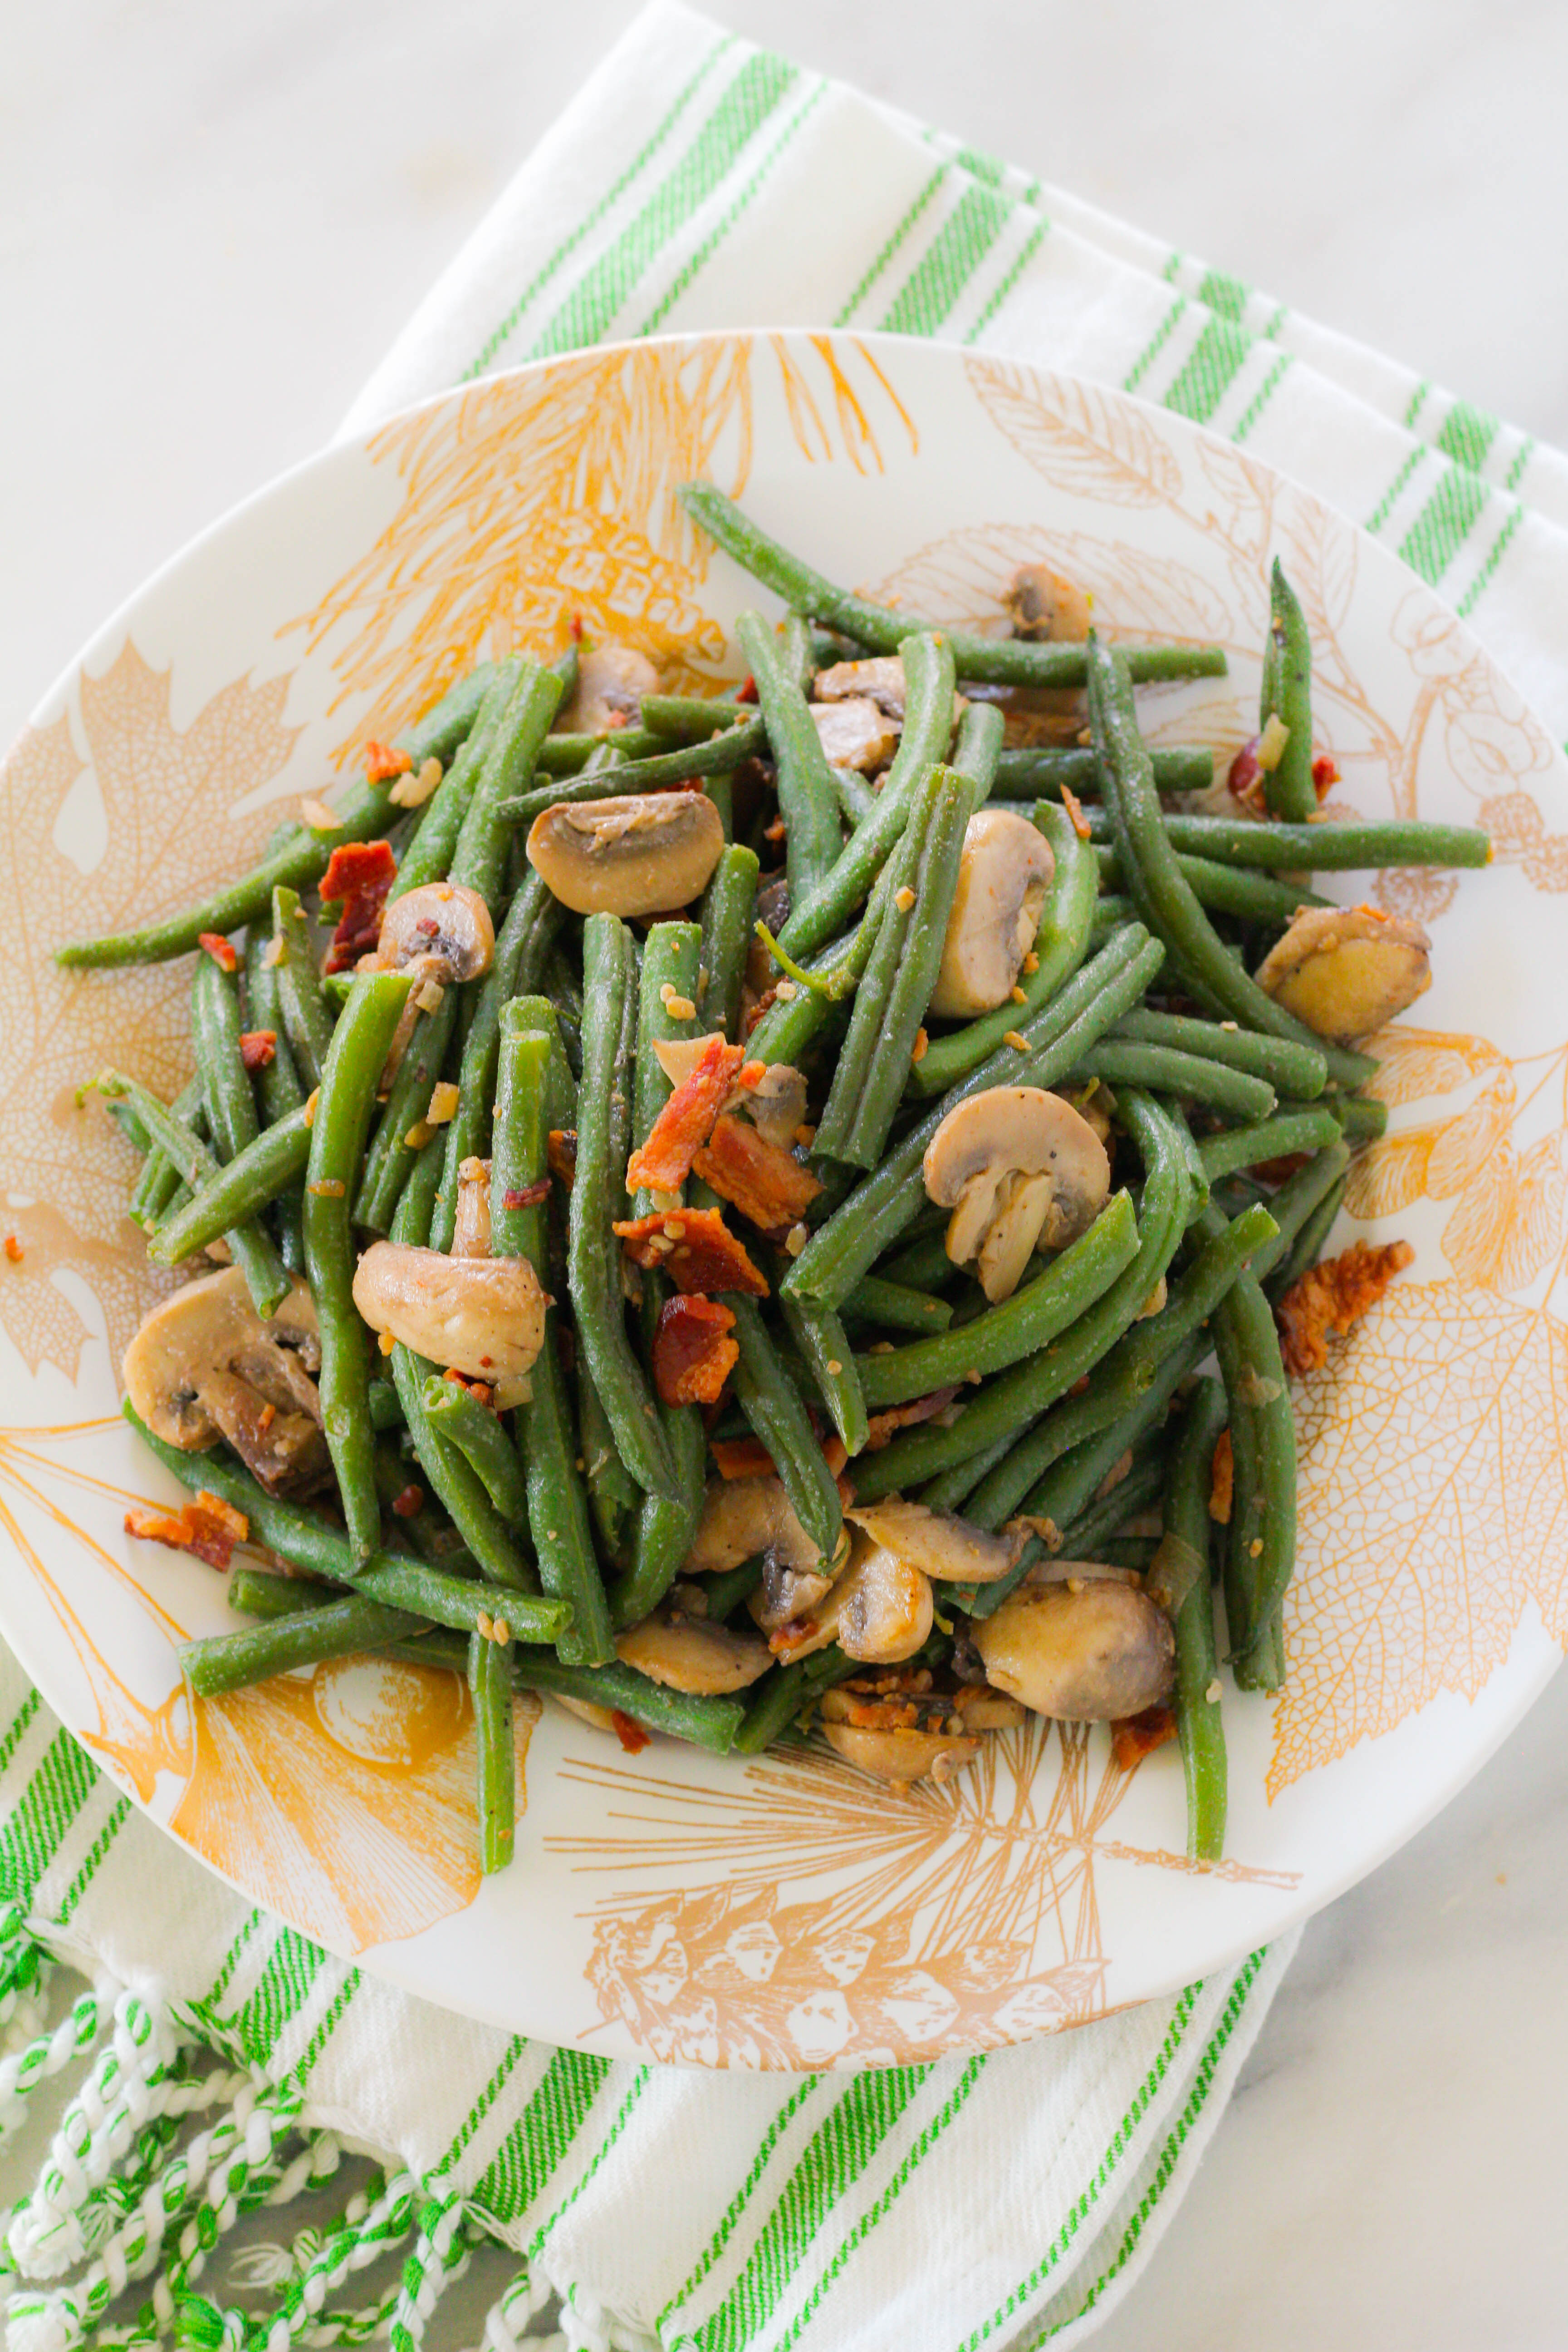 Instant Pot Green Beans with Mushrooms & Bacon | Green beans | Instant pot recipes | Thanksgiving | Holiday recipes | Vegetable side dish